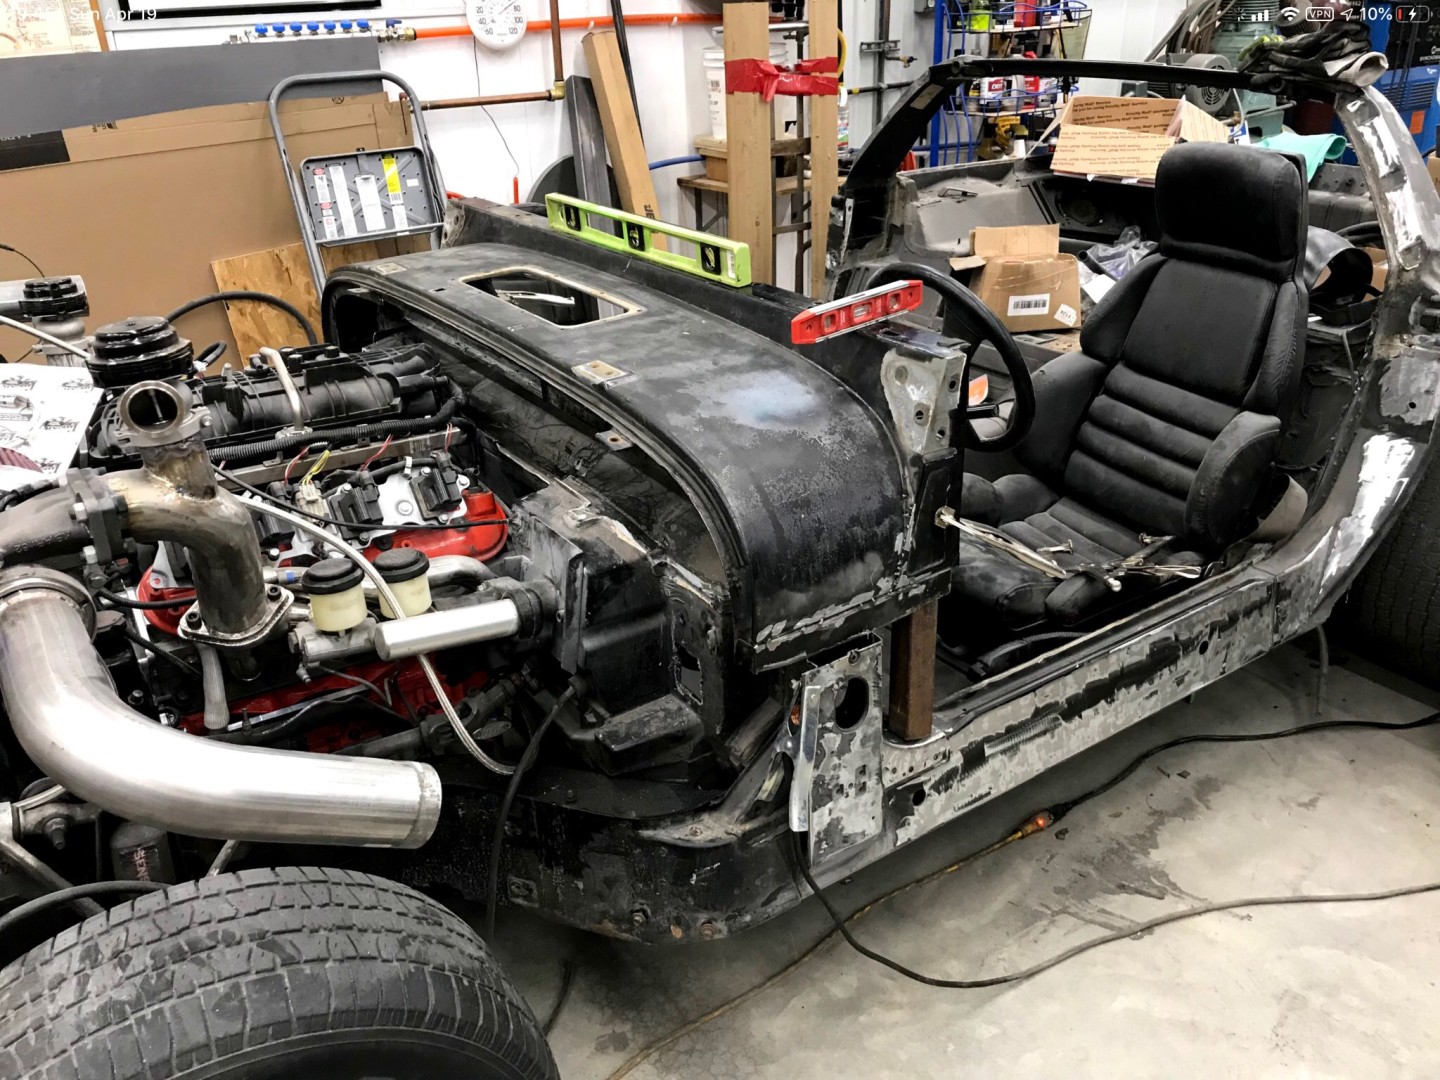 Fitting the YJ cowl to the C4 chassis. The vette was several inches wider, so I had to shave the front door pillars so it would fit.